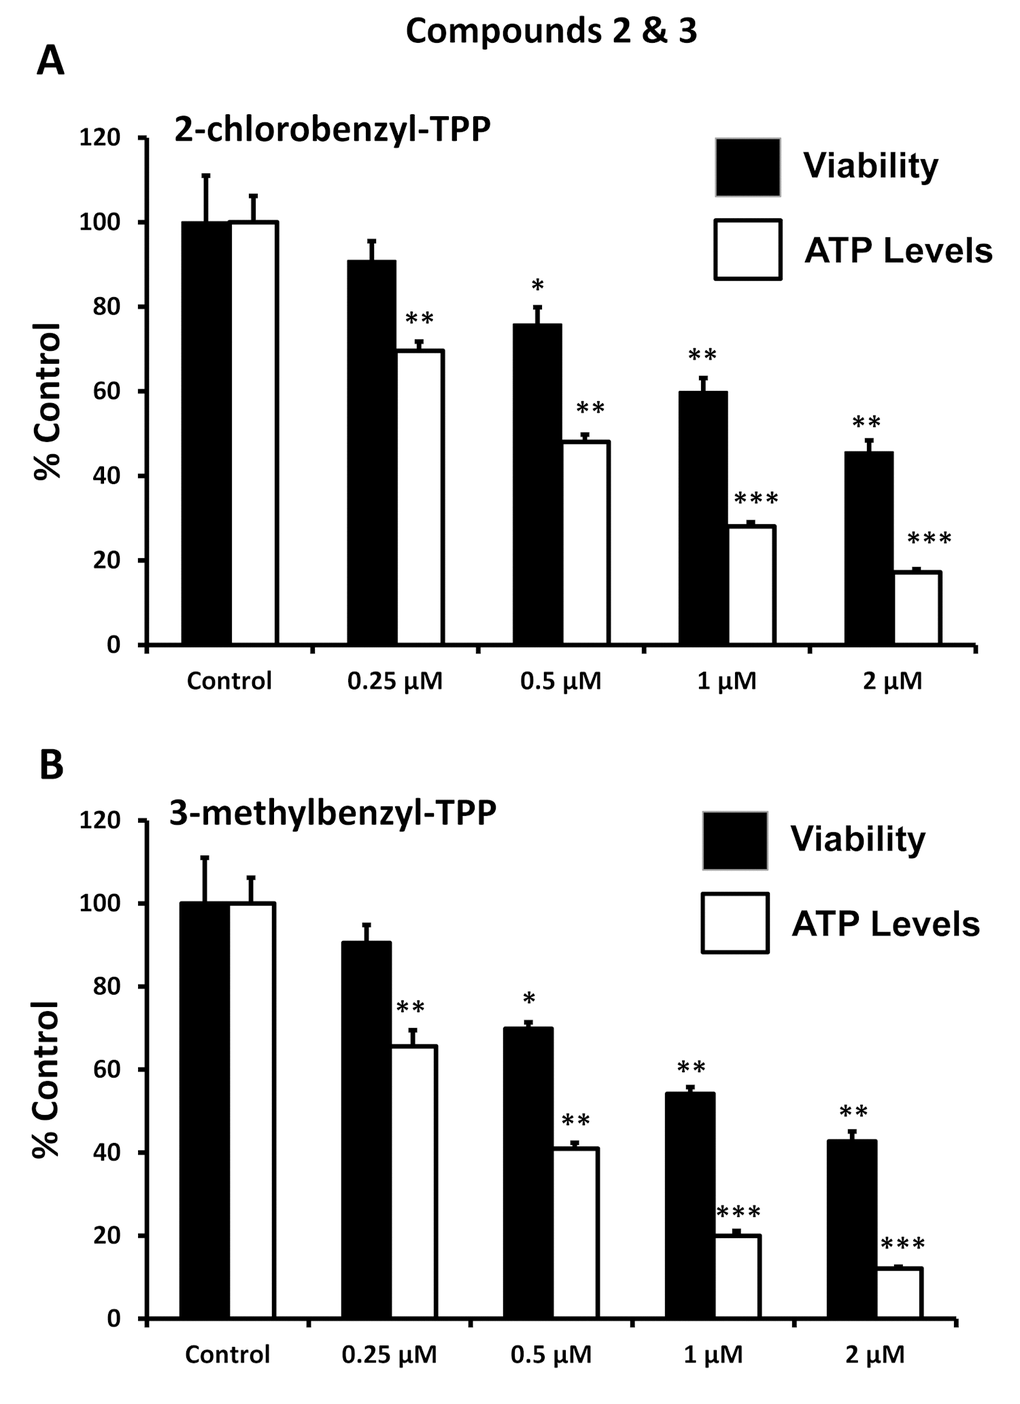 Effect of TPP derivatives on cell viability and intracellular ATP levels in MCF-7 human breast cancer cells: Compounds 2 and 3. Cell viability and intracellular ATP levels were determined in the same treated samples. Hoechst staining (%) (shown in black bars); ATP levels (%) indicated in white bars. MCF-7 cells were treated for 72h. Data are represented as mean +/- SEM. Note that both 2-chlorobenzyl-TPP and 3-methylbenzyl-TPP progressively deplete cellular ATP levels. *p 